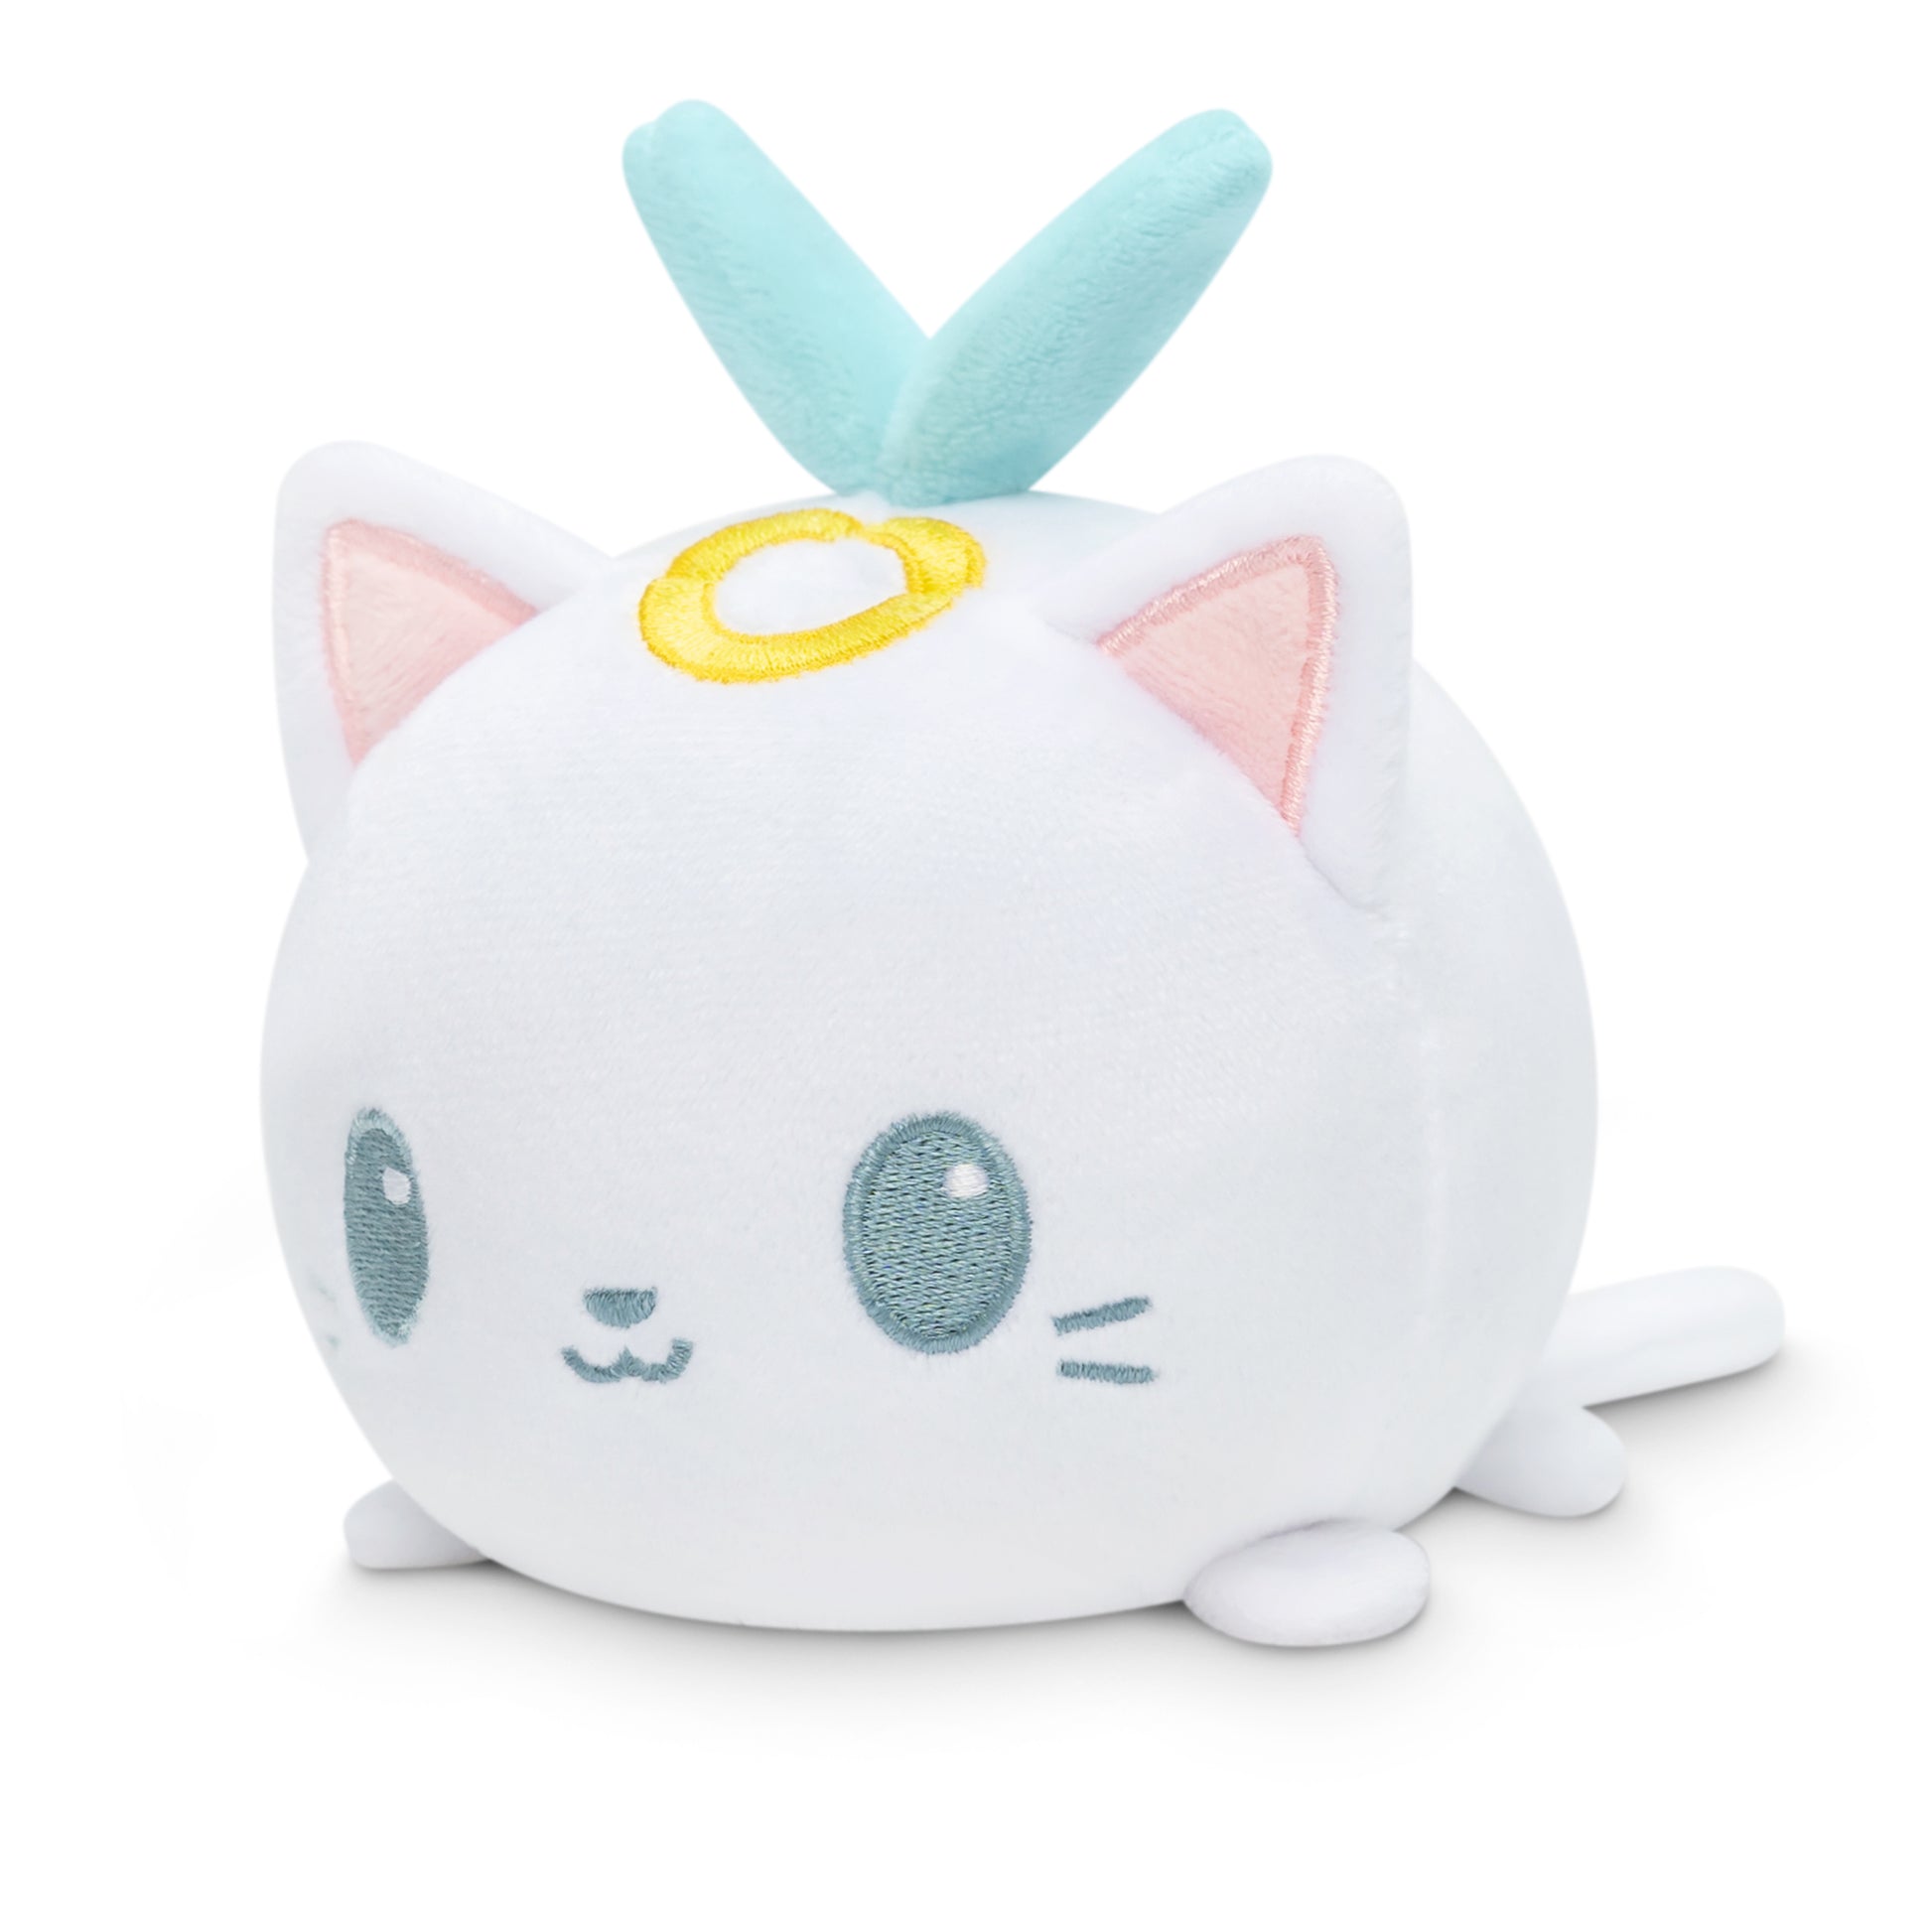 A white Plushiverse Angelic Kitty Plushie Tote Bag with a blue ring on its head, perfect for TeeTurtle plushies collectors.